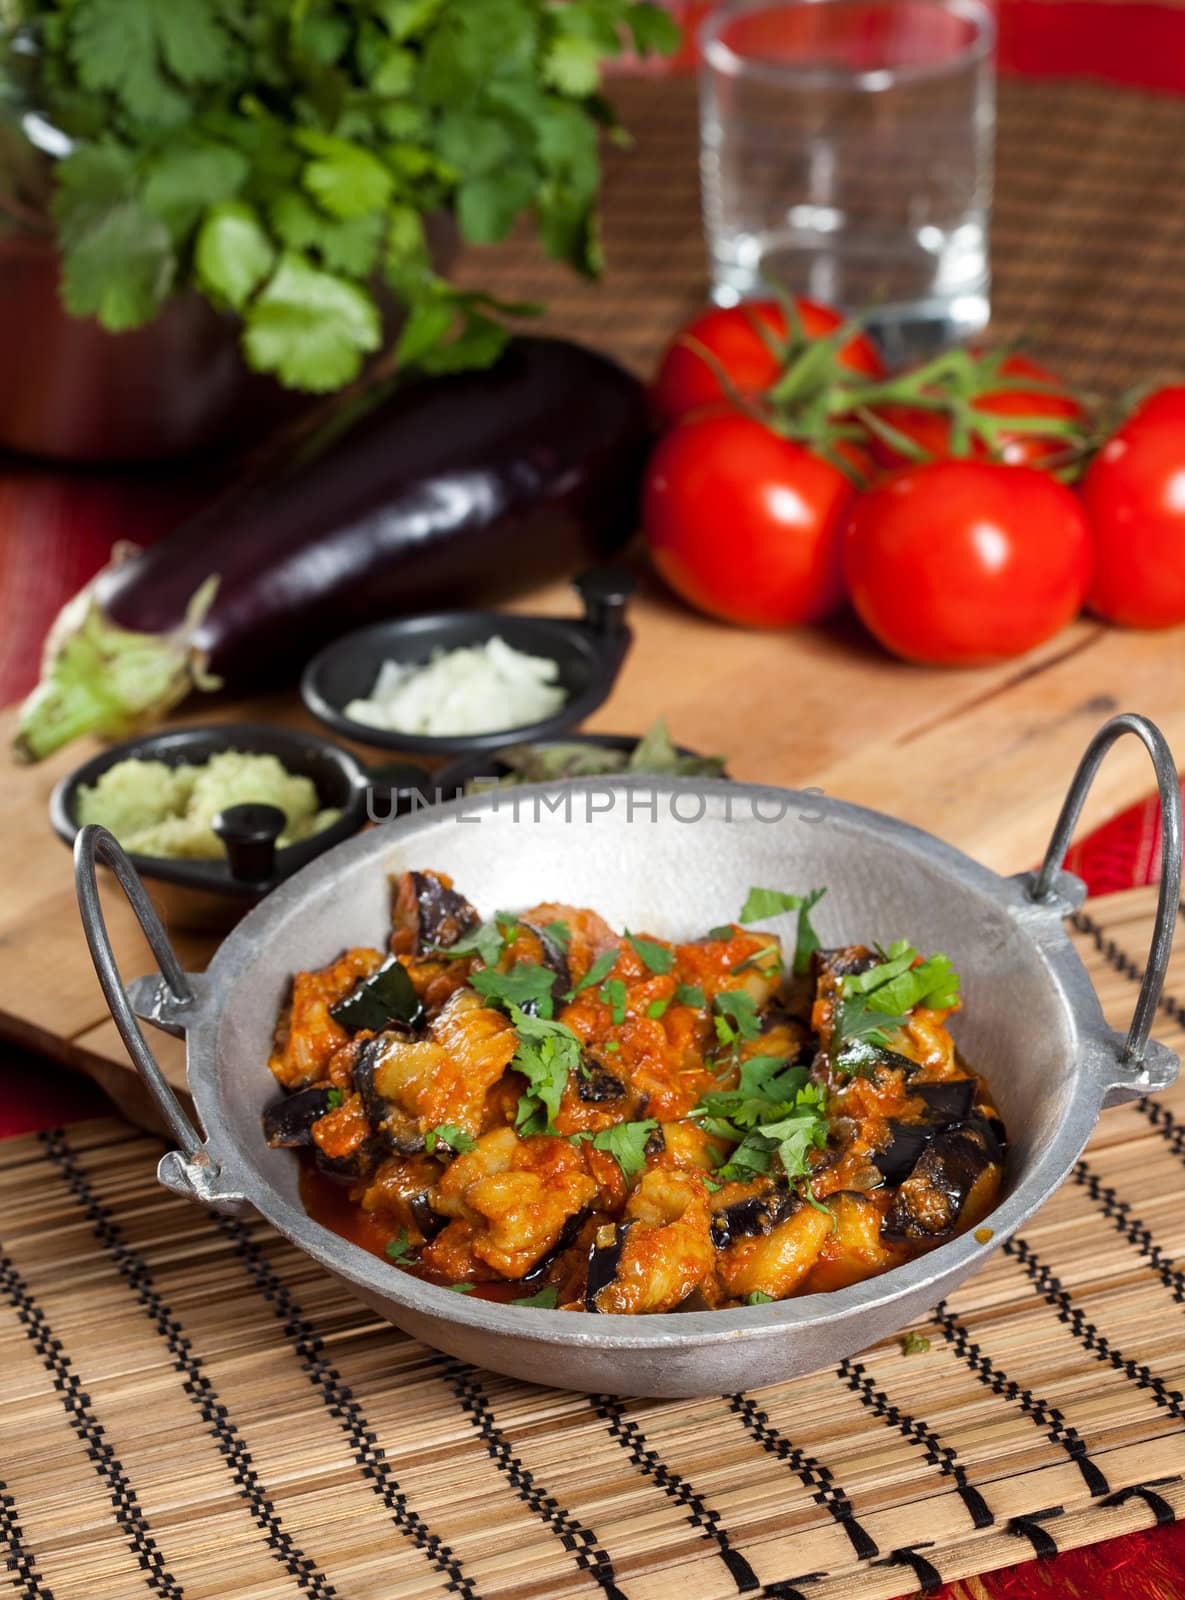 Indian style eggplant/aubergine dish with fresh coriander on top